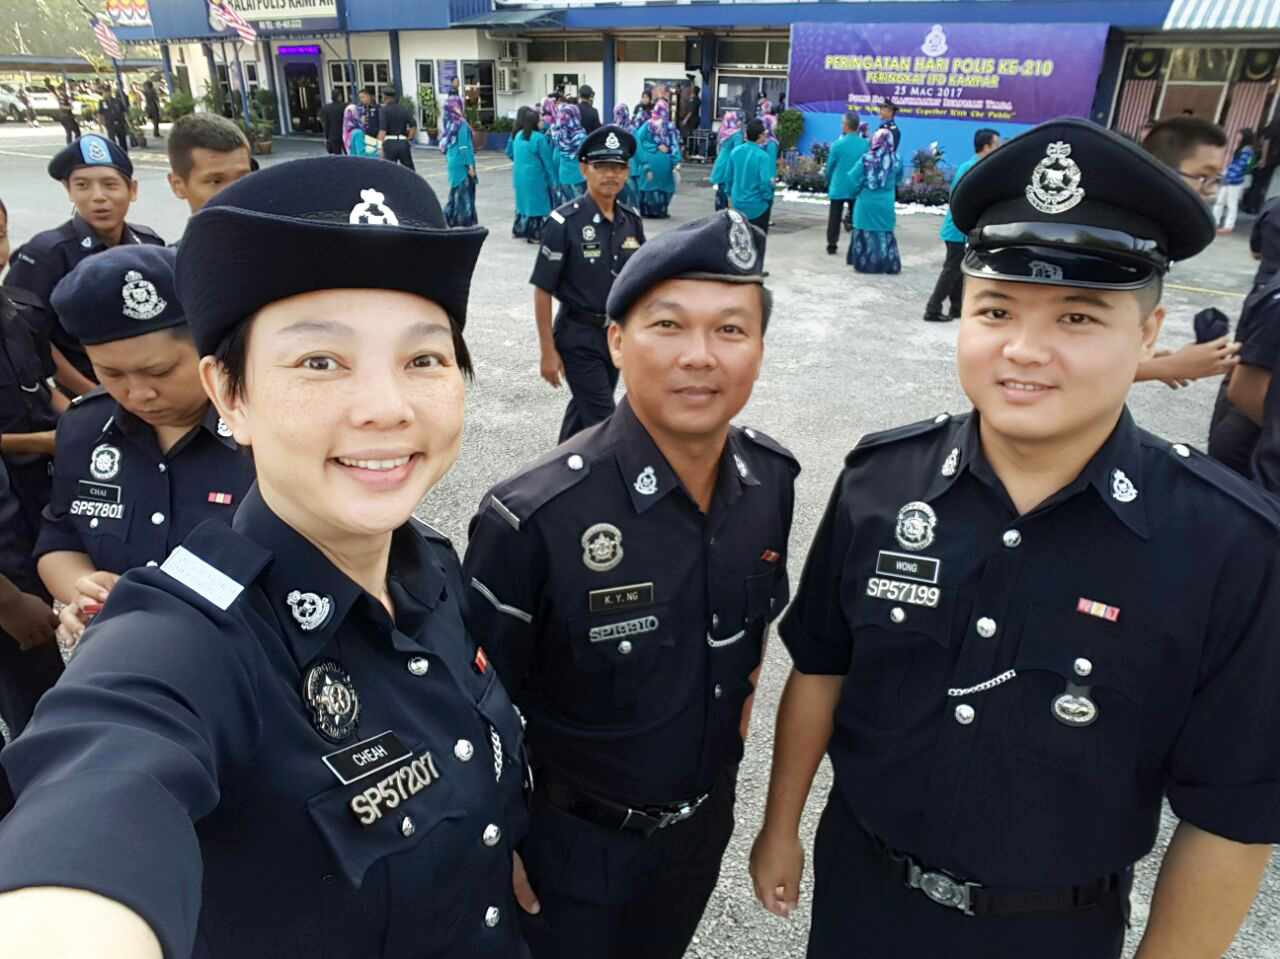 First Published Study On Malaysian Pvr Dr Cheah Far Left With Other Pvr Officers During The Kampar District Police Headquarters Police Day Celebration In 2017 Faculty Of Arts And Social Science Fas Department Of Public Relations Assistant Professor